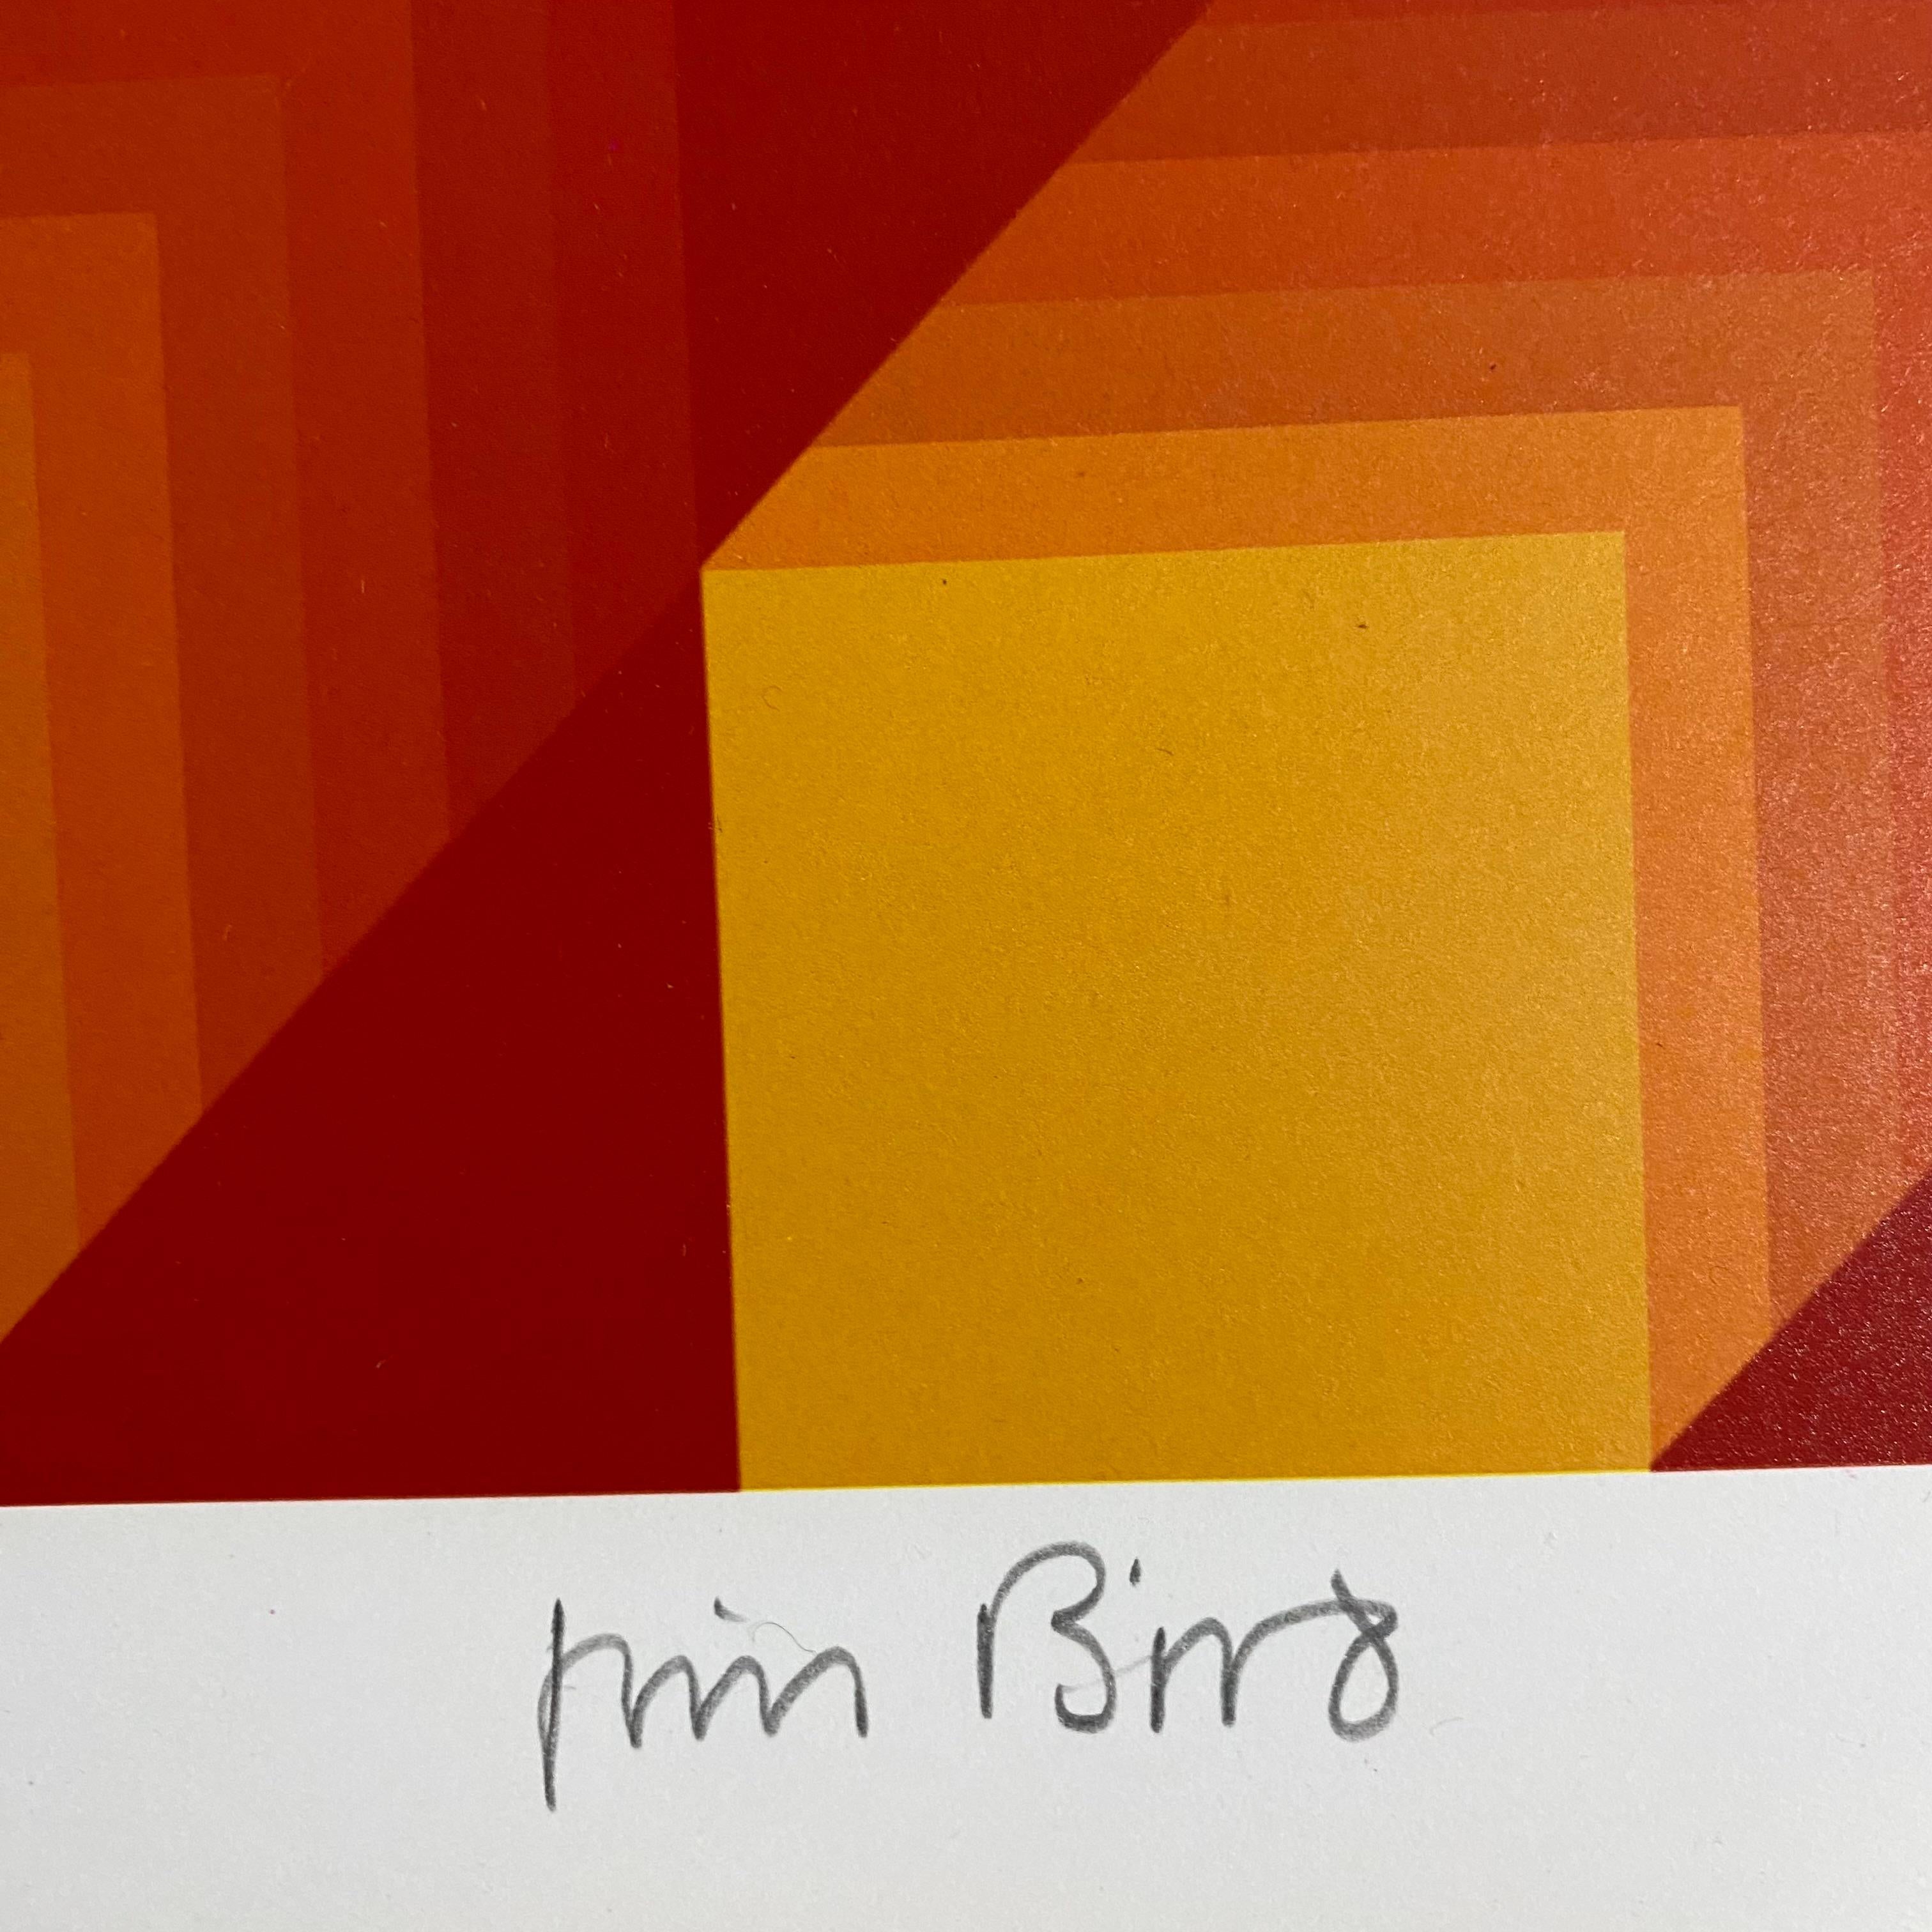 Jim BIRD - Tribute to Vasarely 
Silkscreen on paper
Edition of 25 
Numbered and signed in pencil by the artist 
68 x 68 cms 
Circa 1970
390 euros 